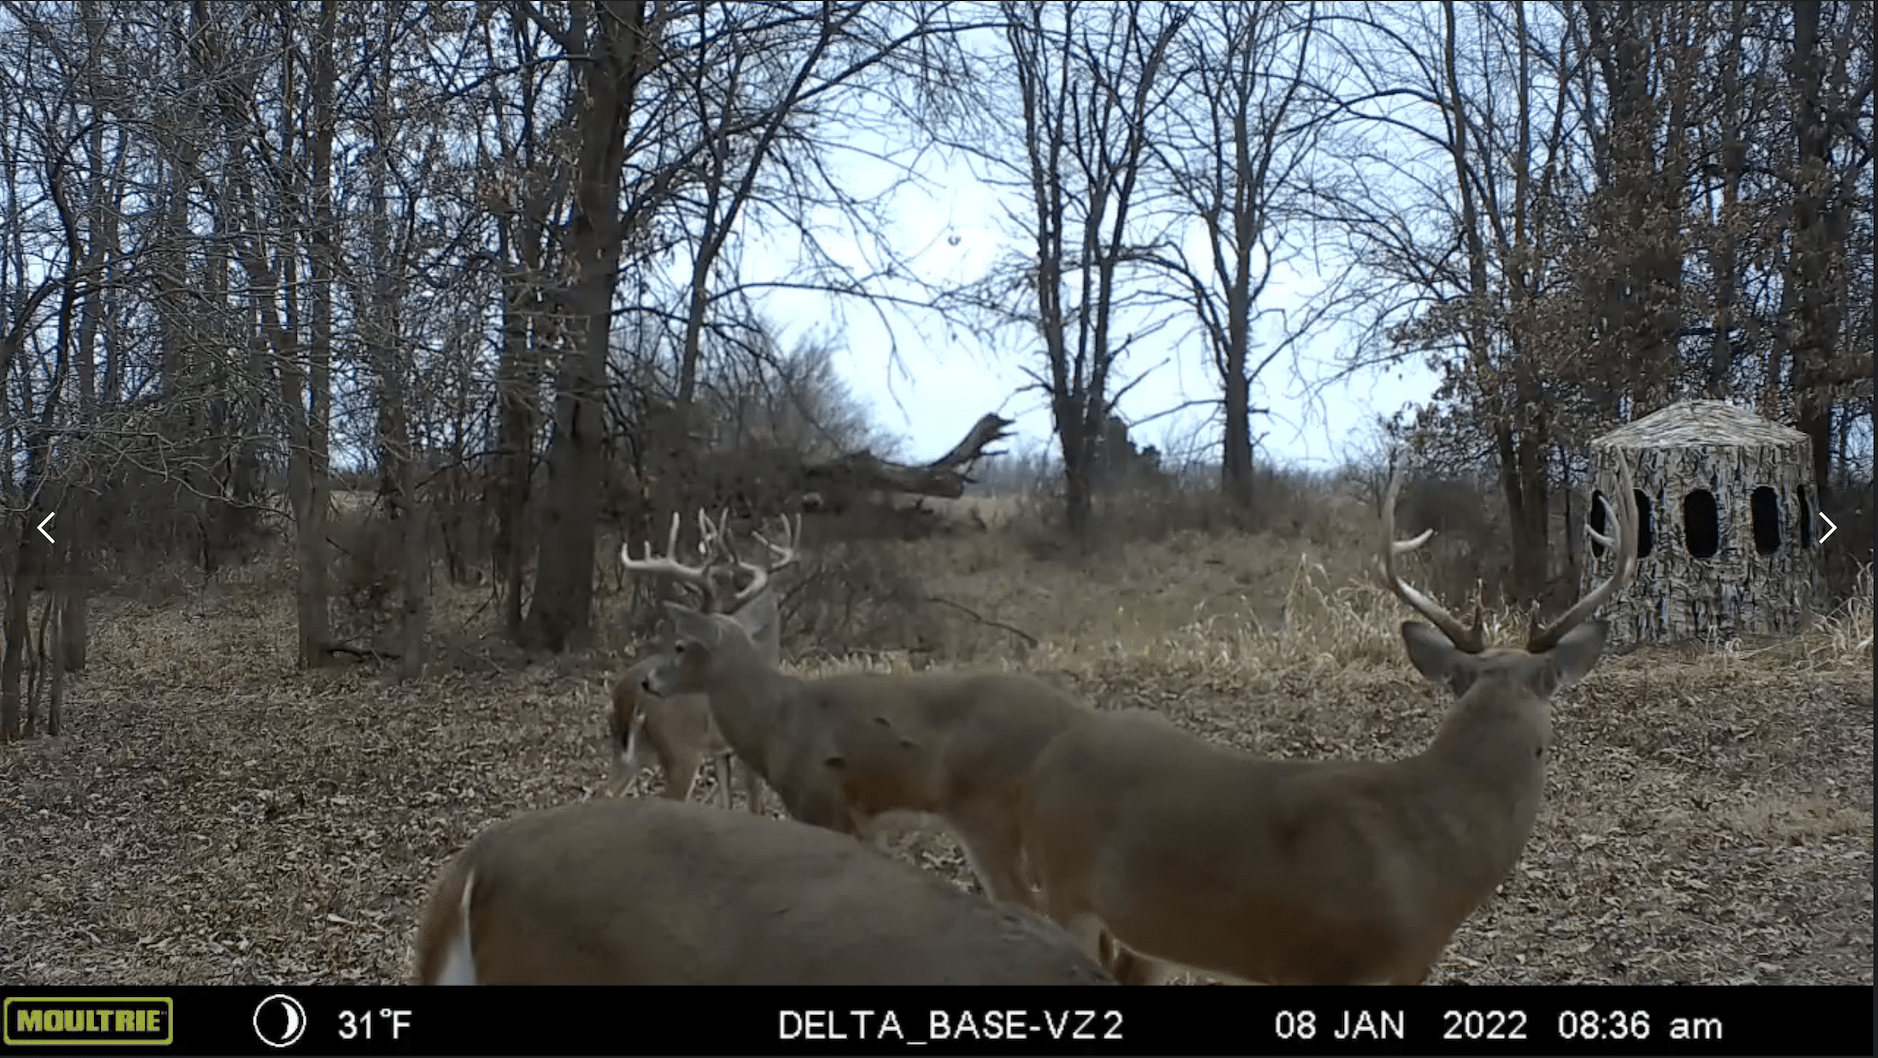 Image of deer in field taken with a Moultrie Mobile Delta Base Cellular Trail Camera